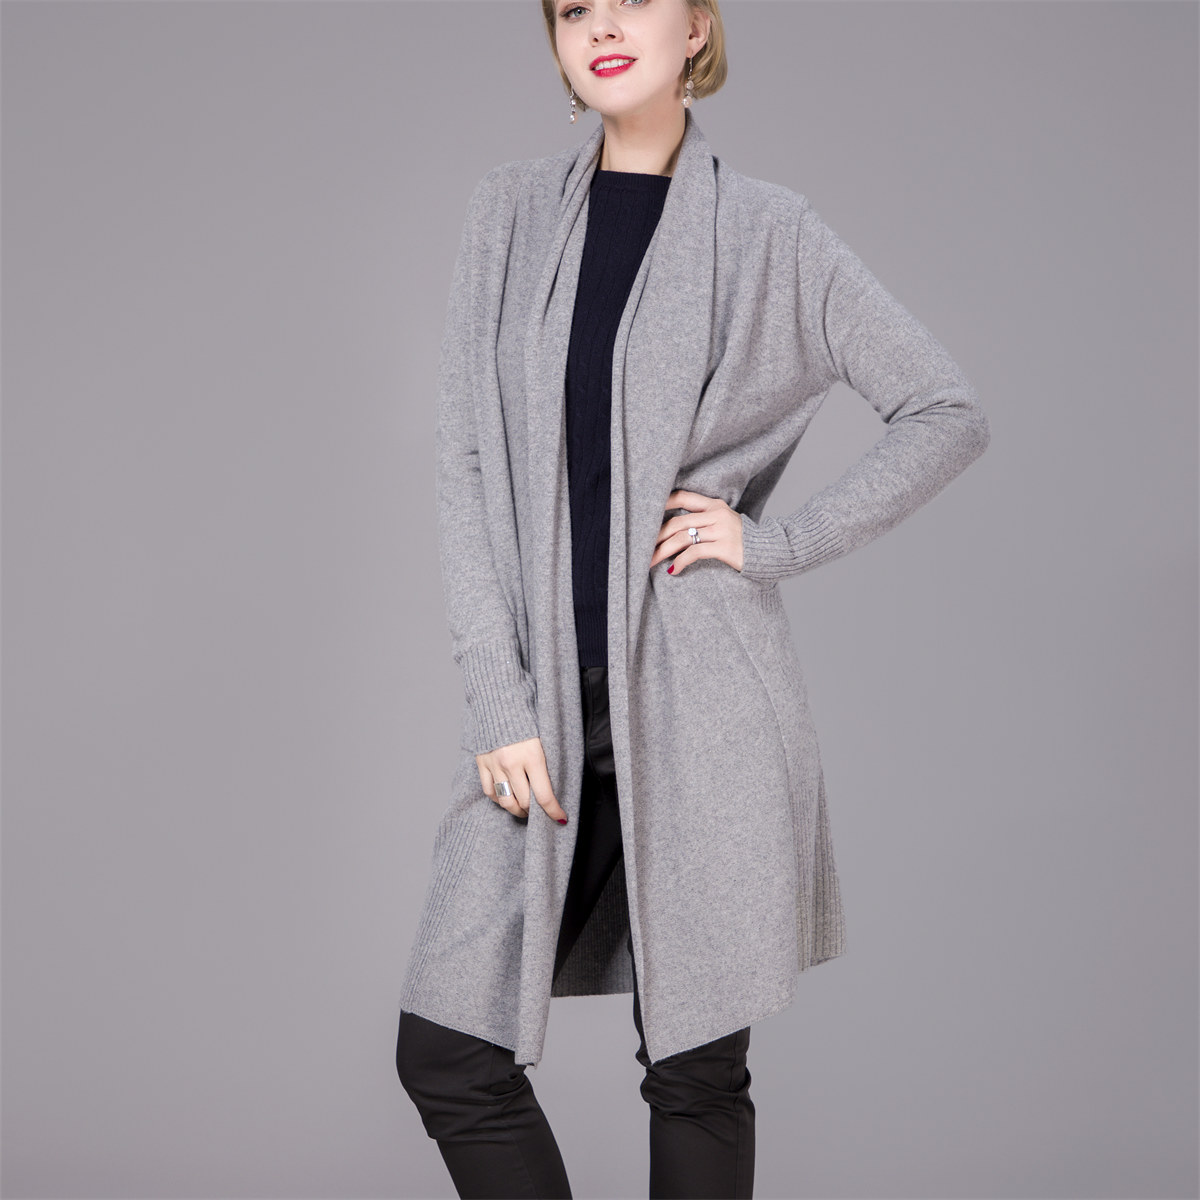 Wholesale Long Cashmere Sweater Manufacturer and Supplier, Product ...